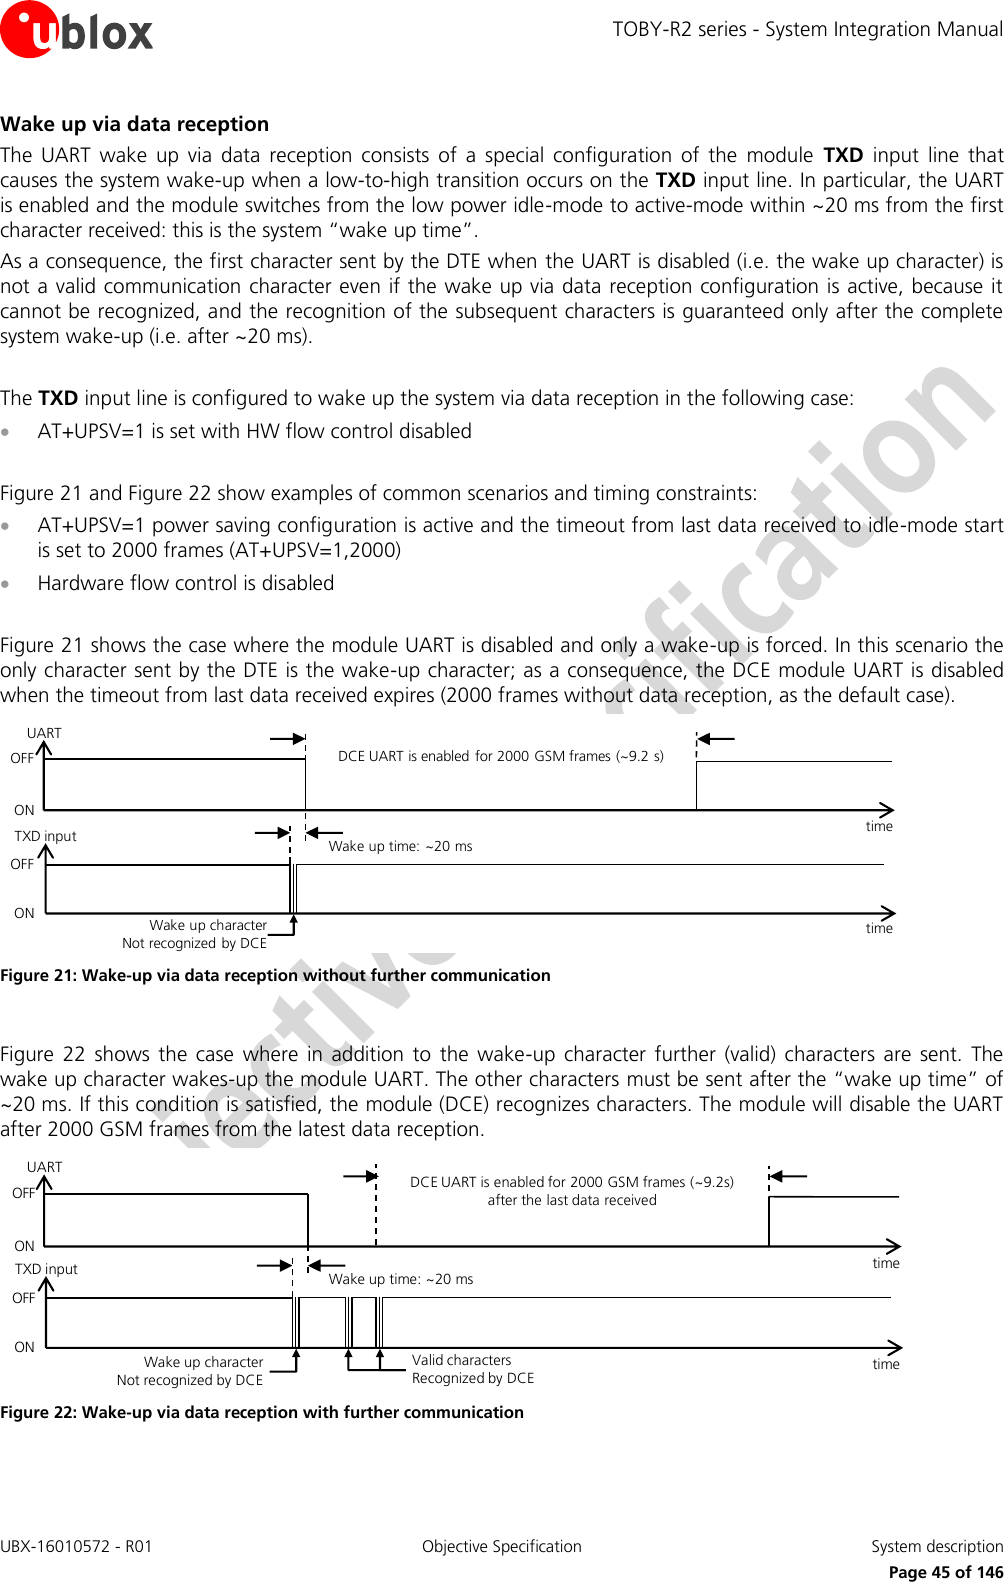 TOBY-R2 series - System Integration Manual UBX-16010572 - R01  Objective Specification  System description     Page 45 of 146 Wake up via data reception The  UART  wake  up  via  data  reception  consists  of  a  special  configuration  of  the  module  TXD  input  line  that causes the system wake-up when a low-to-high transition occurs on the TXD input line. In particular, the UART is enabled and the module switches from the low power idle-mode to active-mode within ~20 ms from the first character received: this is the system “wake up time”. As a consequence, the first character sent by the DTE when the UART is disabled (i.e. the wake up character) is not a valid communication character even if the wake up via data reception configuration is active, because it cannot be recognized, and the recognition of the subsequent characters is guaranteed only after the complete system wake-up (i.e. after ~20 ms).  The TXD input line is configured to wake up the system via data reception in the following case:  AT+UPSV=1 is set with HW flow control disabled  Figure 21 and Figure 22 show examples of common scenarios and timing constraints:  AT+UPSV=1 power saving configuration is active and the timeout from last data received to idle-mode start is set to 2000 frames (AT+UPSV=1,2000)  Hardware flow control is disabled  Figure 21 shows the case where the module UART is disabled and only a wake-up is forced. In this scenario the only character sent by the DTE is the wake-up character; as a consequence, the DCE module UART is disabled when the timeout from last data received expires (2000 frames without data reception, as the default case). Wake up character        Not recognized by DCEOFFONDCE UART is enabled for 2000 GSM frames (~9.2 s)time Wake up time: ~20 mstime TXD inputUARTOFFON Figure 21: Wake-up via data reception without further communication  Figure  22  shows  the  case  where  in addition  to  the  wake-up  character  further  (valid) characters  are  sent.  The wake up character wakes-up the module UART. The other characters must be sent after the “wake up time” of ~20 ms. If this condition is satisfied, the module (DCE) recognizes characters. The module will disable the UART after 2000 GSM frames from the latest data reception. Wake up character        Not recognized by DCEValid characters          Recognized by DCEDCE UART is enabled for 2000 GSM frames (~9.2s) after the last data receivedtime Wake up time: ~20 mstime OFFONTXD inputUARTOFFON Figure 22: Wake-up via data reception with further communication  